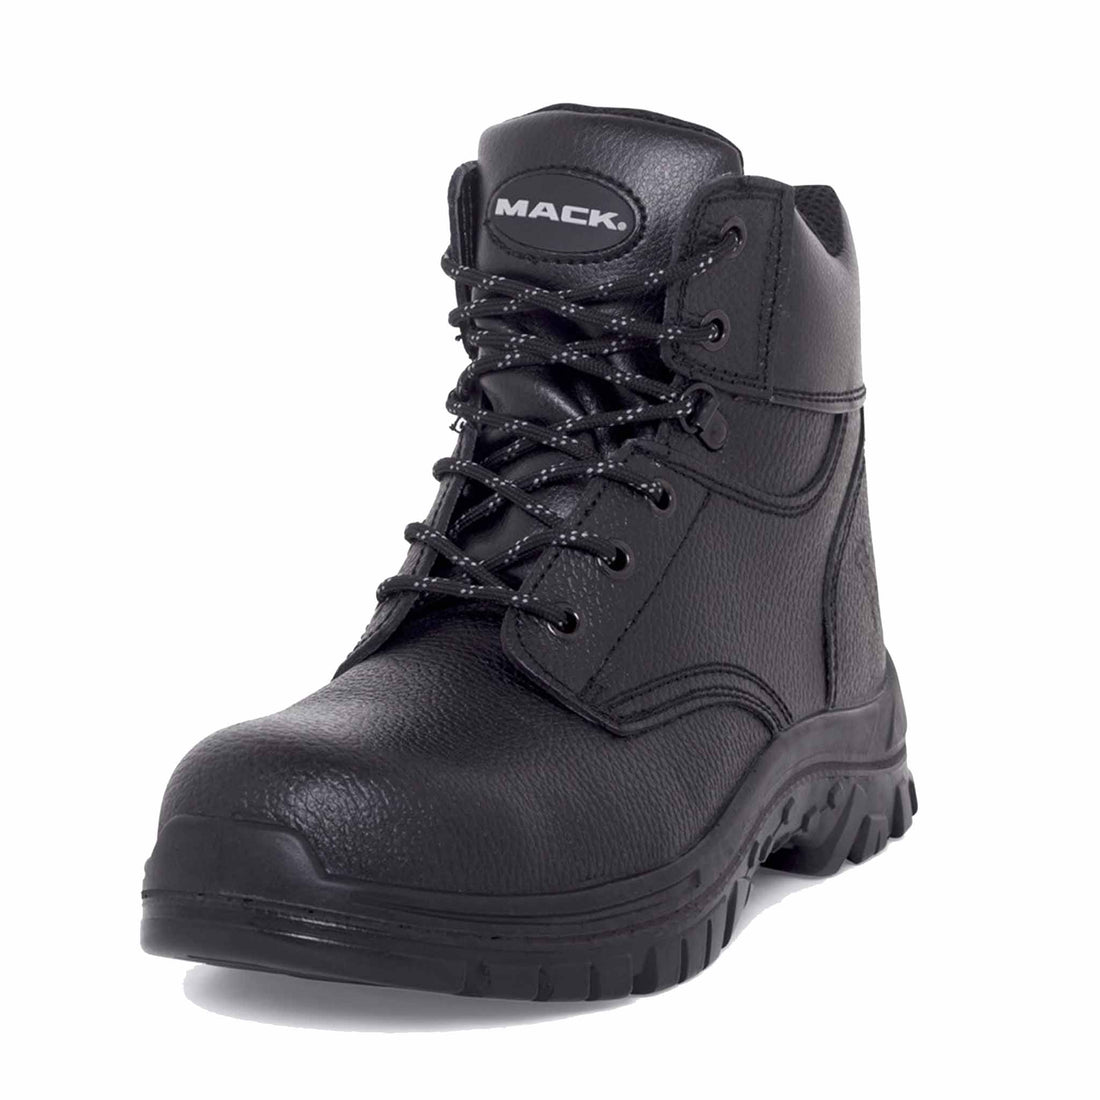 Mack Boots | Tradies Workwear and Safety